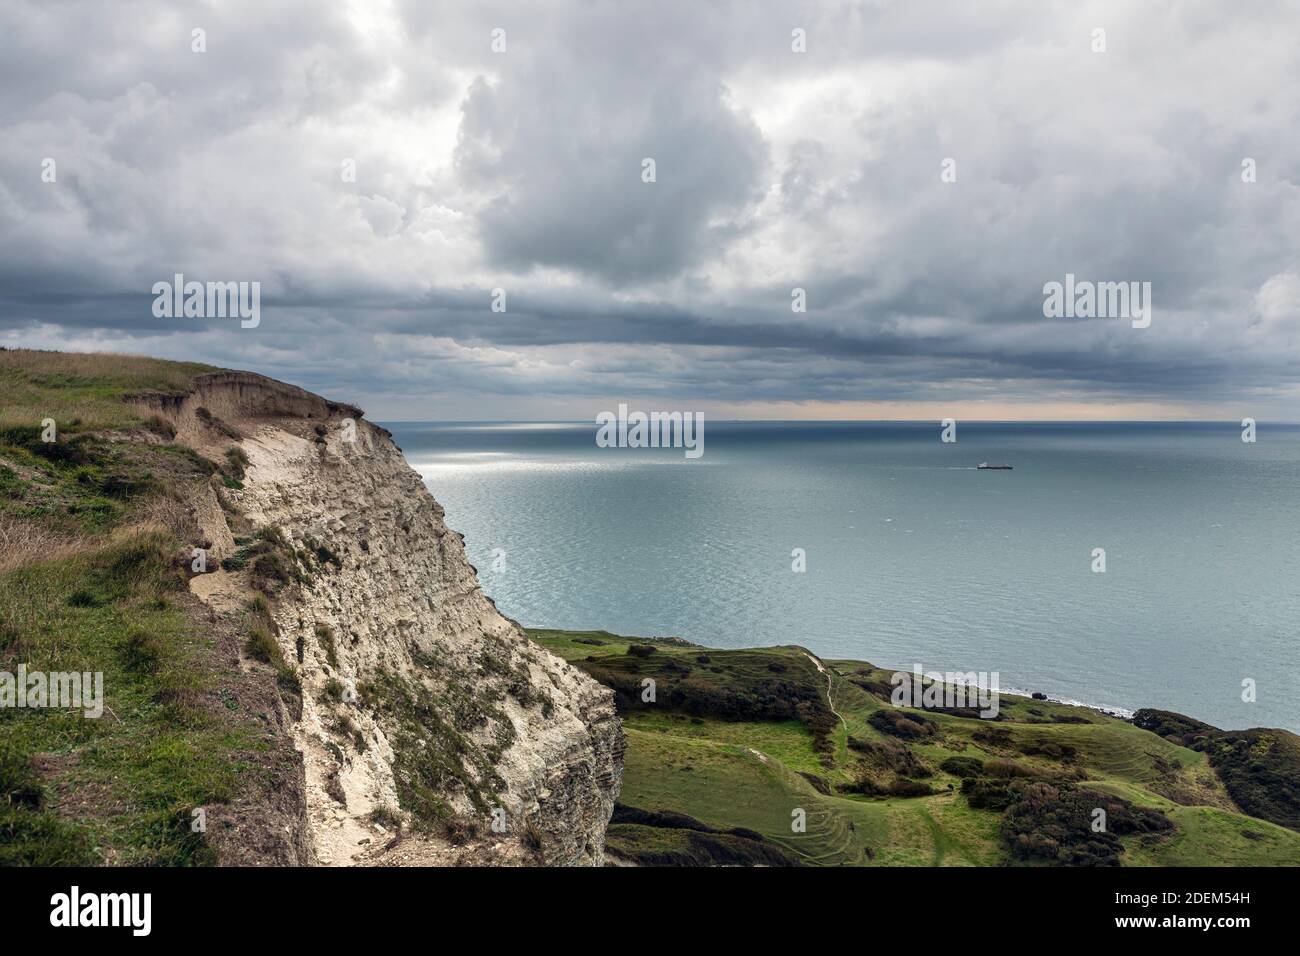 View across the English Channel from Gore Cliff near St Catherine's Point, Isle of Wight Stock Photo